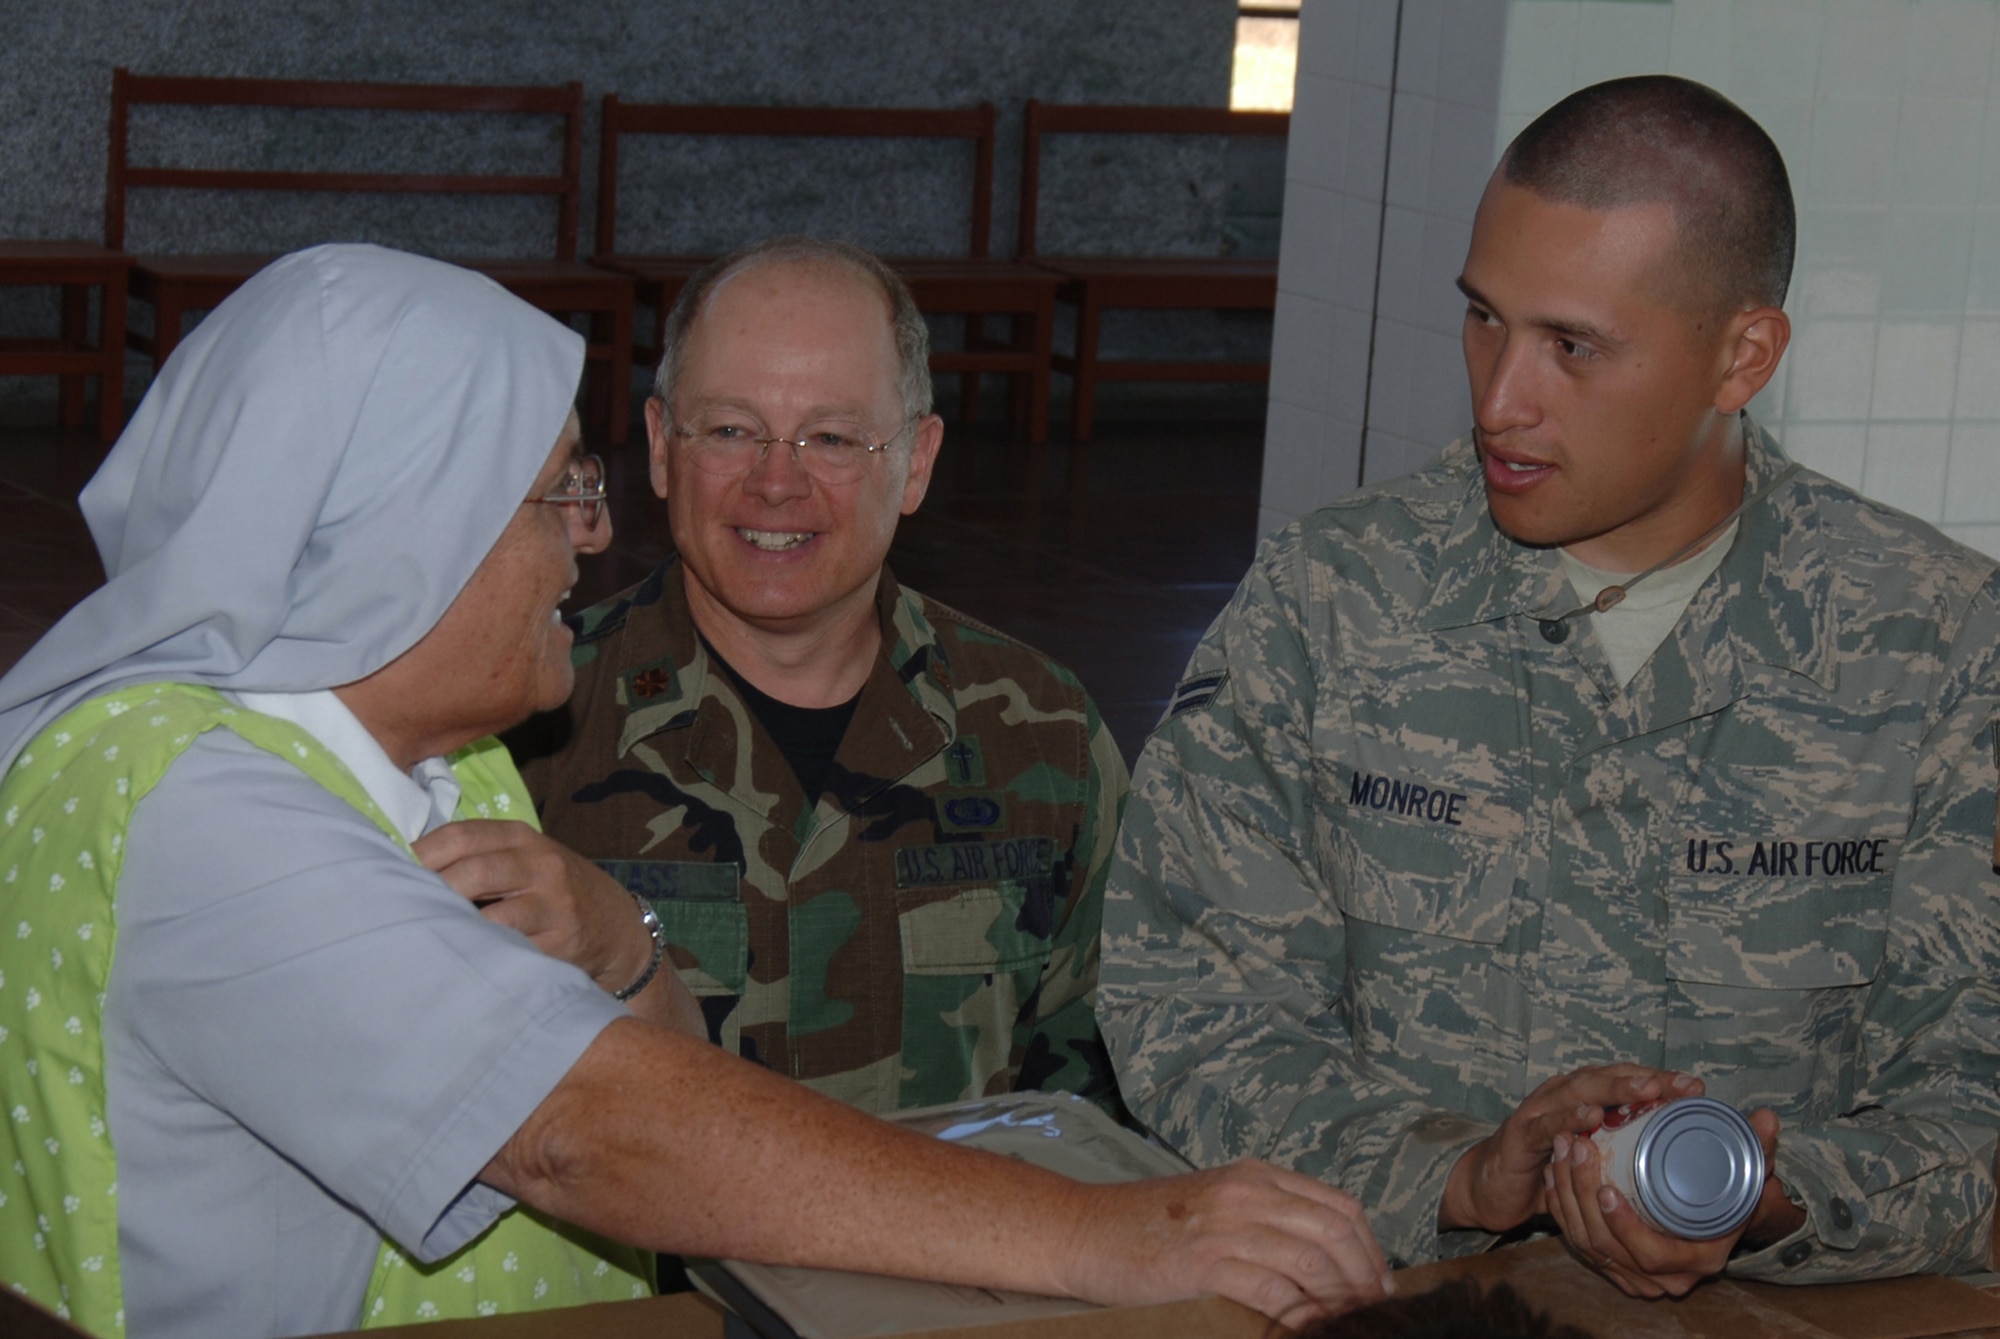 U.S. Air Force Chaplain (Maj.) James Glass (left) and Airman 1st Class George Monroe, a volunteer Spanish interpreter, both assigned to Task Force New Horizons, talk with Sister Ananda Delgado of the Juan Andres Vivanco Amorin orphanage,  after delivering food donated by the task force, June 9, in support of New Horizons - Peru 2008, a U.S. and Peru partnered effort to bring relief to underprivileged Peruvians.  (U.S. Air Force photo/Tech. Sgt. Kerry Jackson)